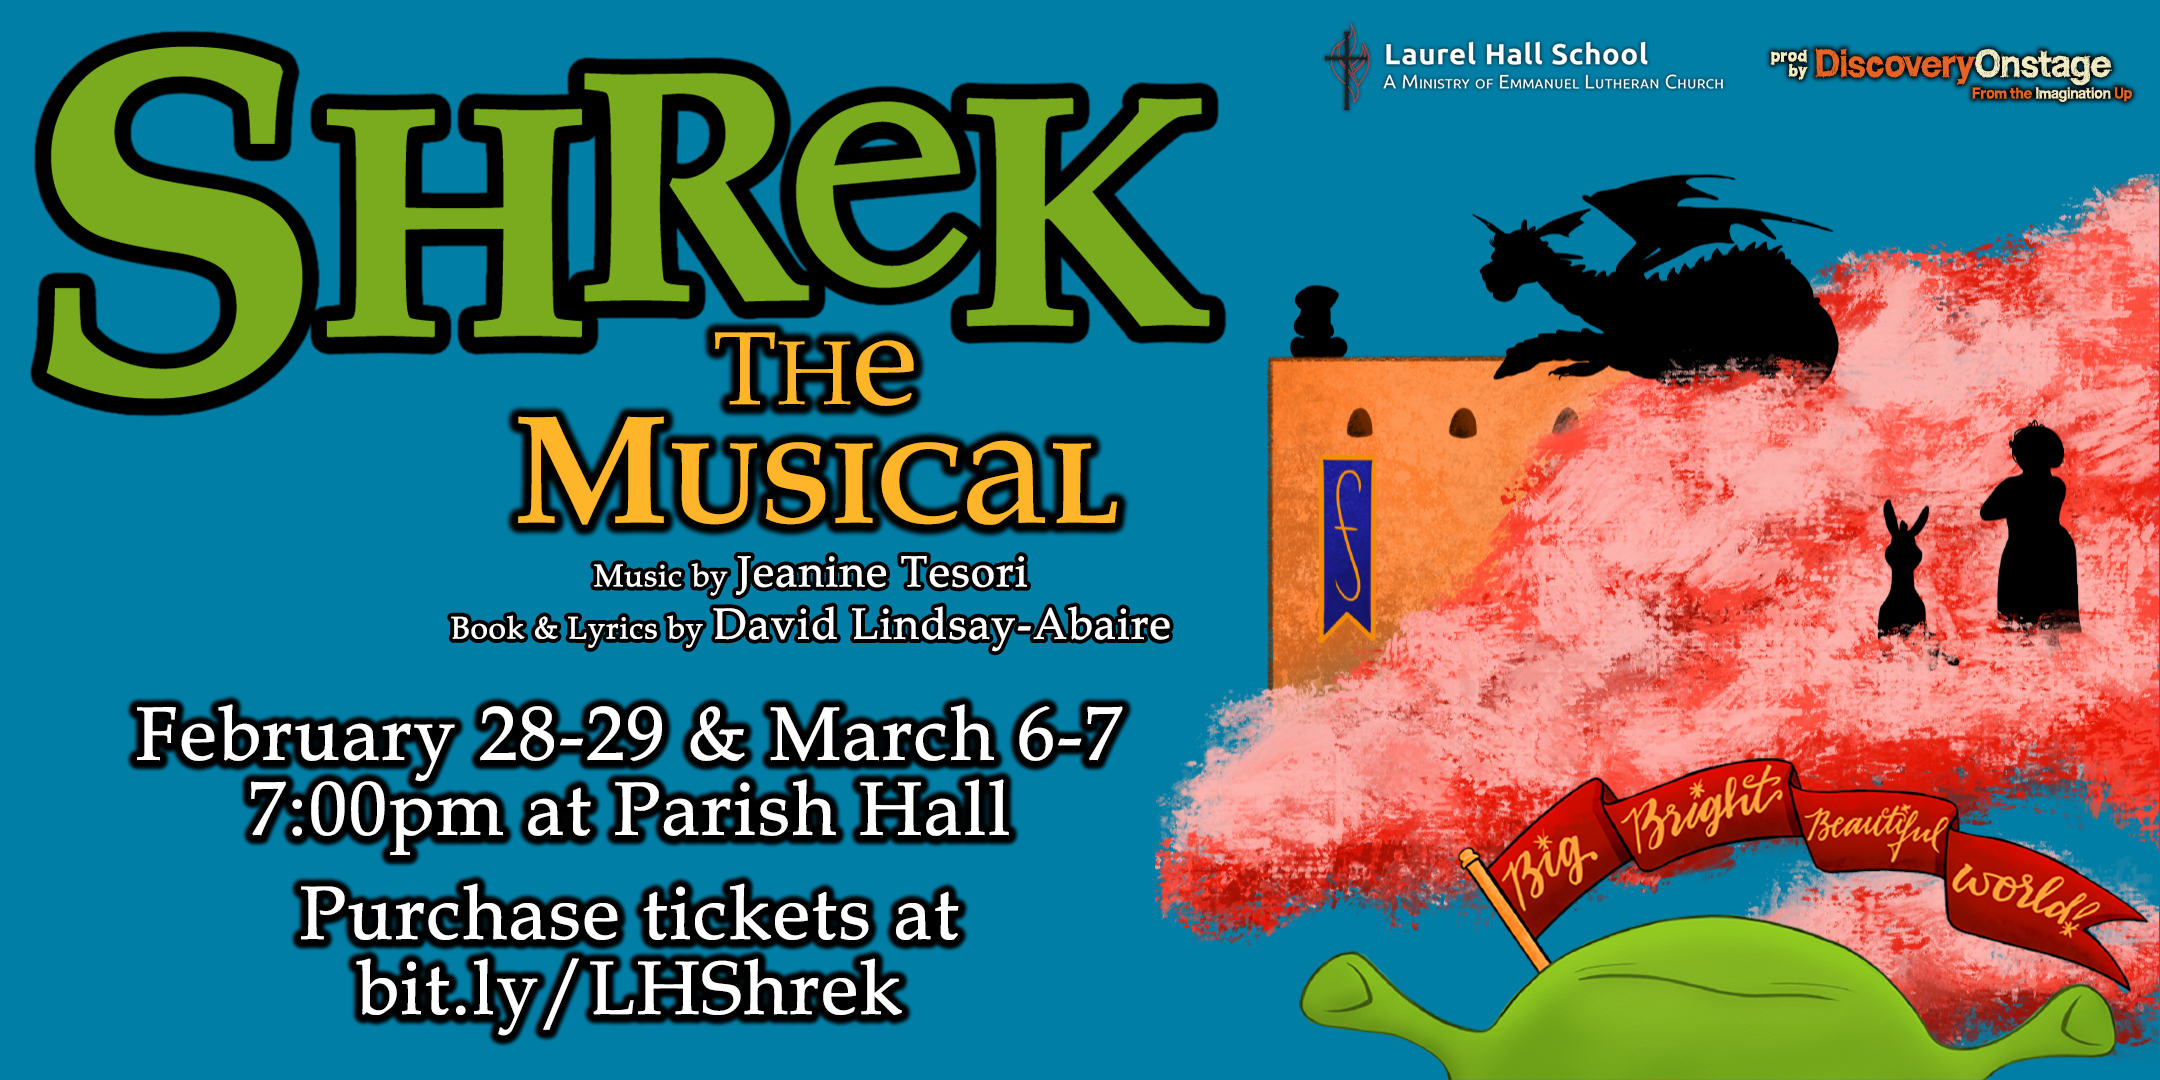 Shrek the Musical! Presented by Laurel Hall School and DiscoveryOnstage